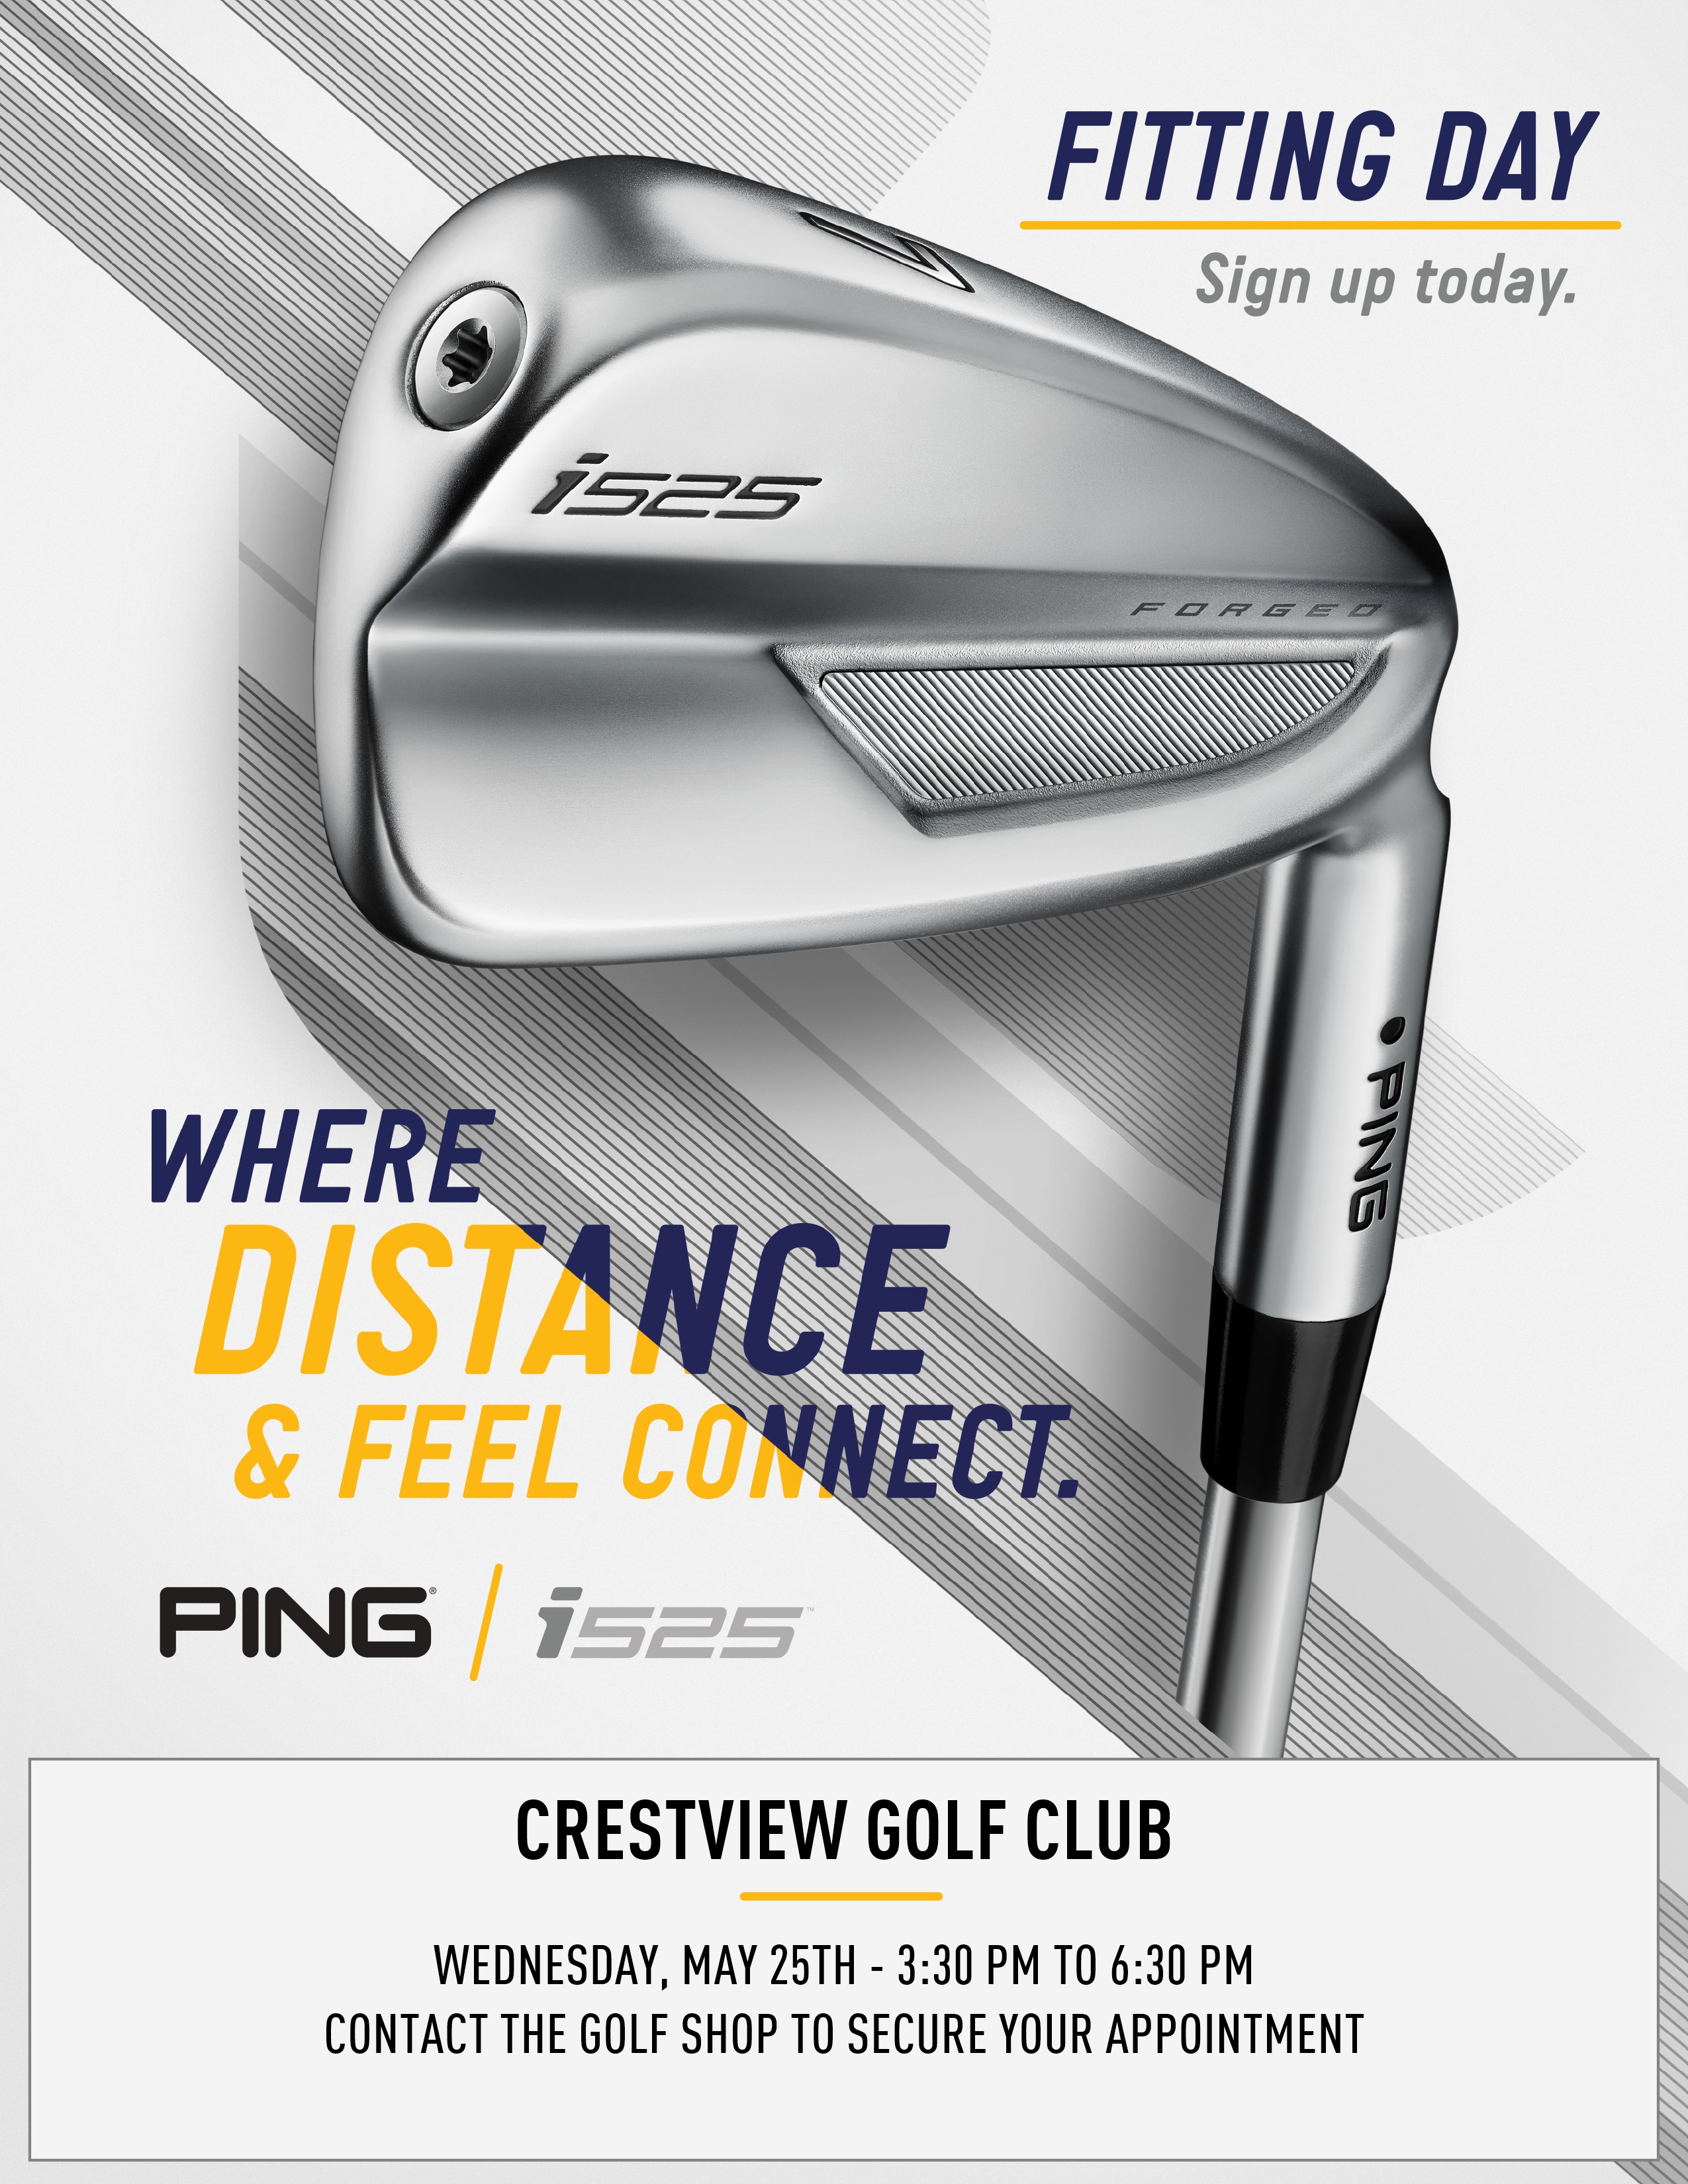 Crestview Ping Fitting Day